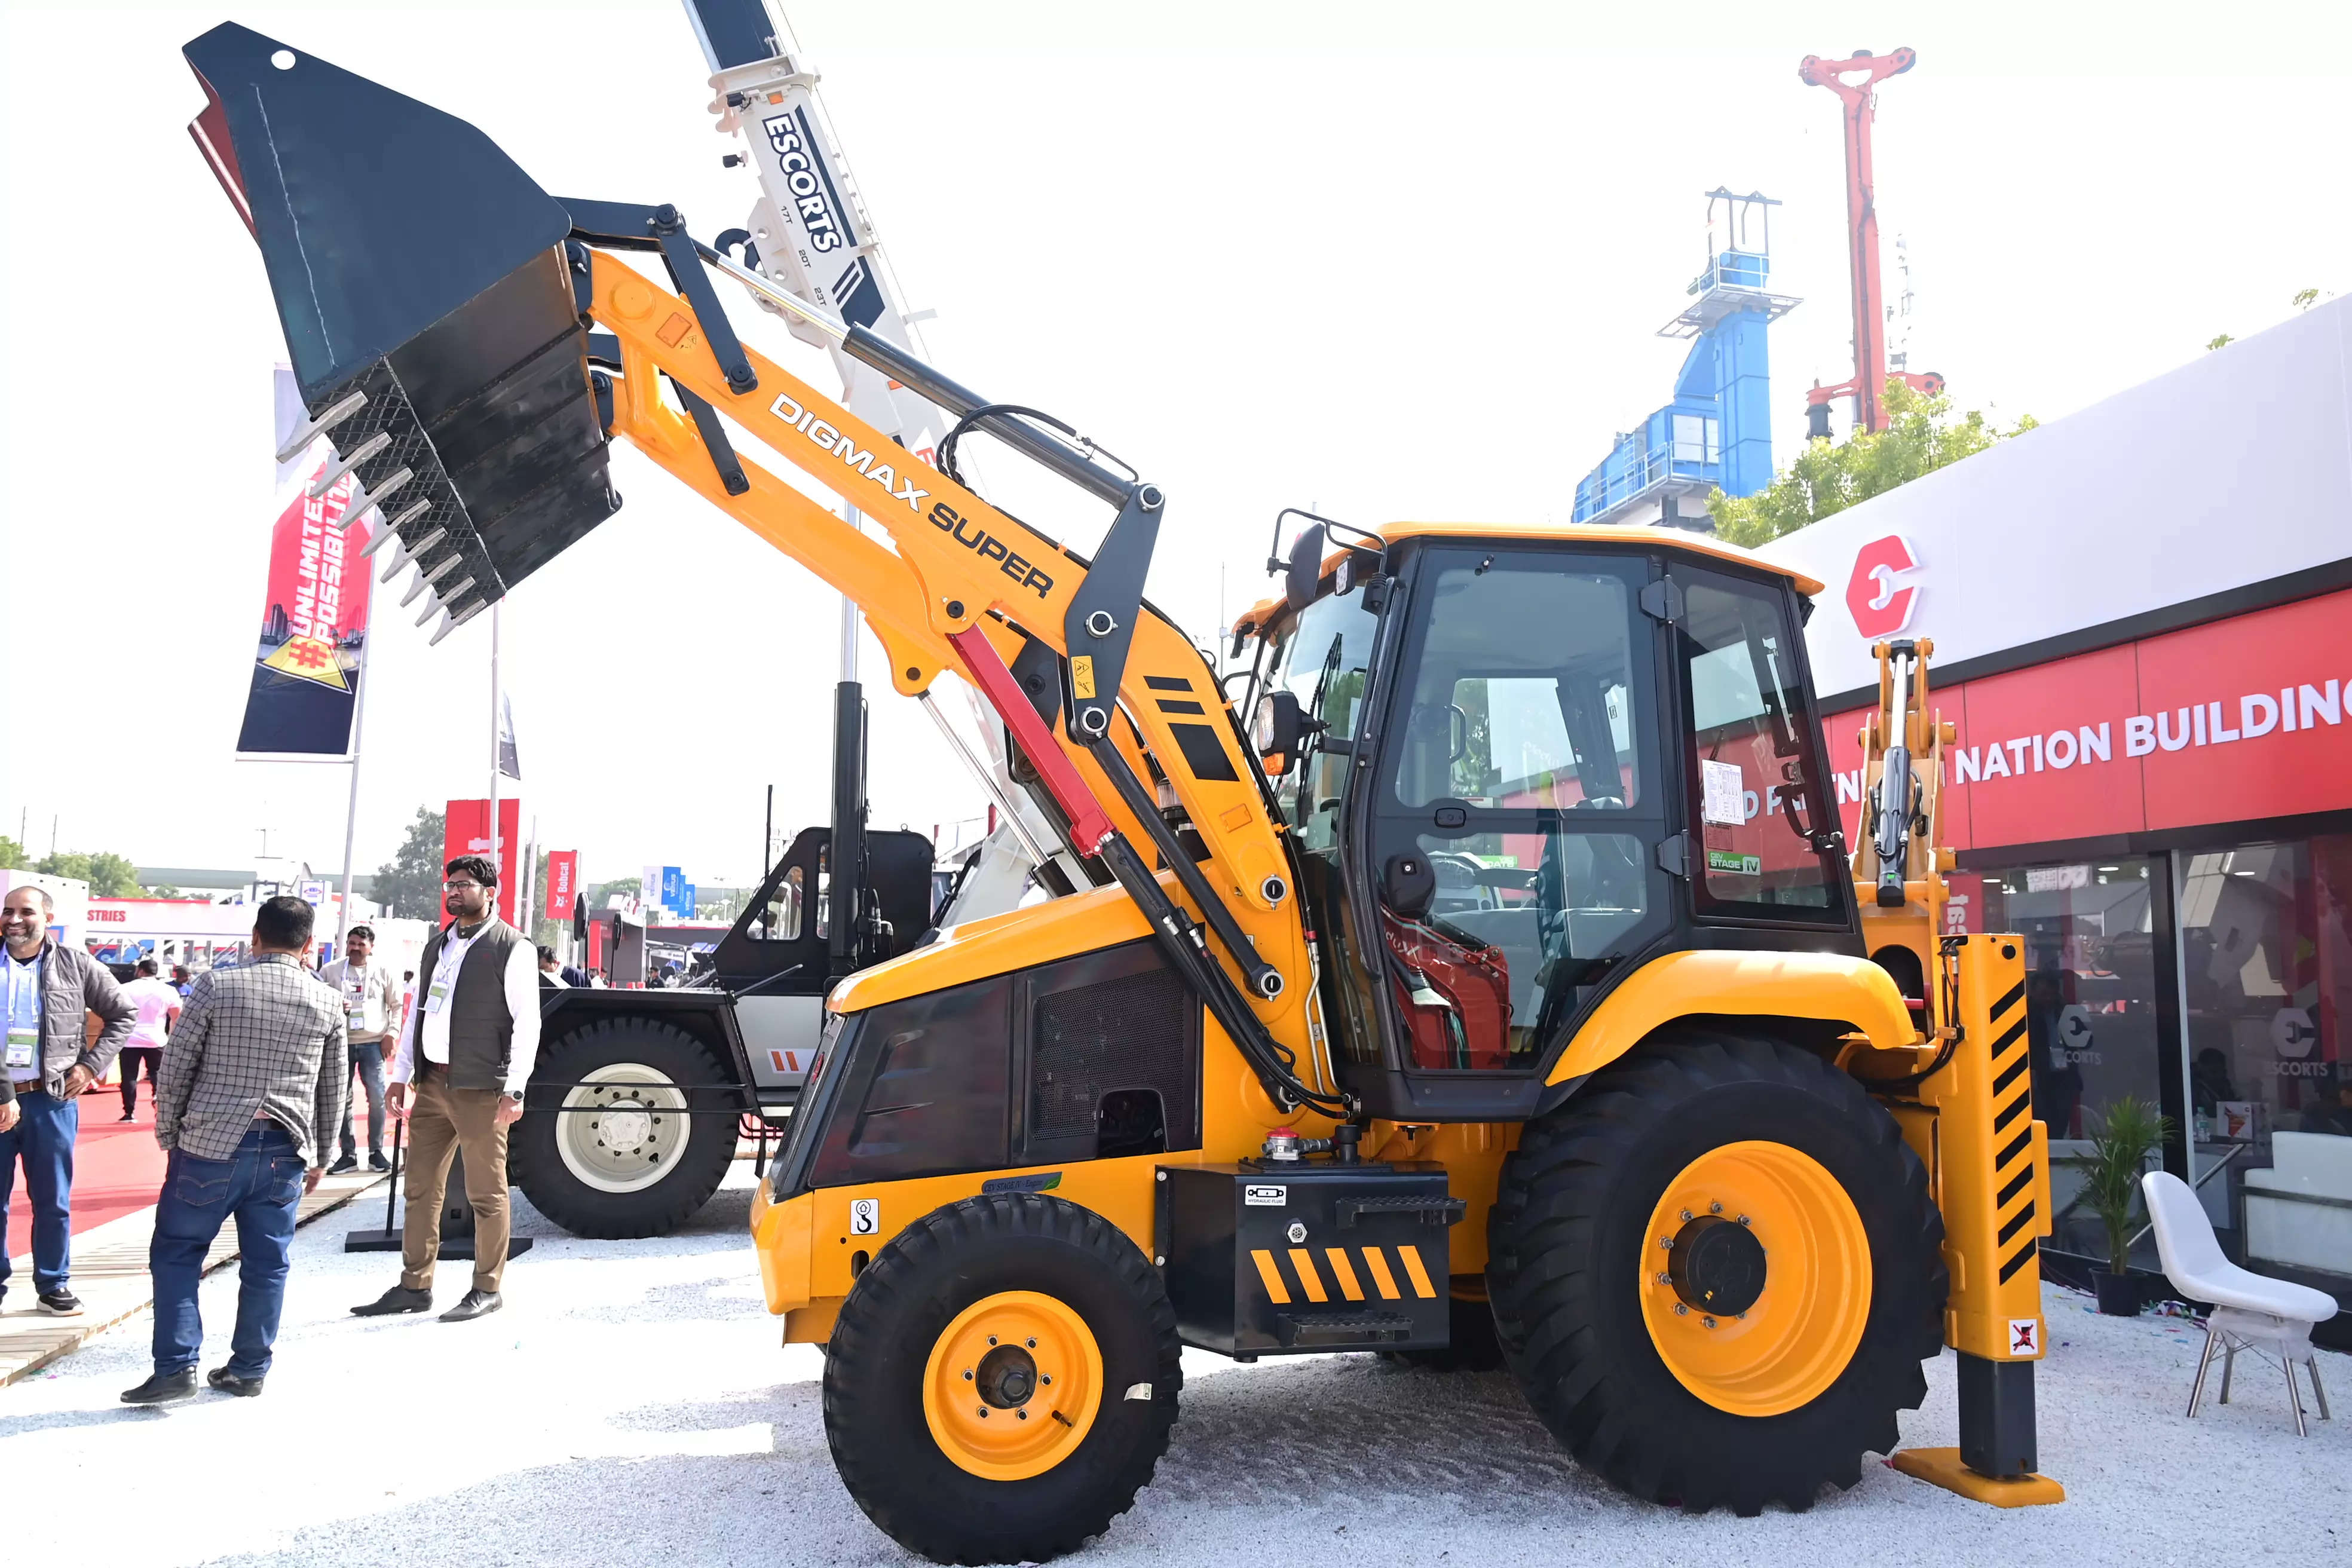  In the overall construction equipment vehicles industry, Escorts has about 9% share in its served segment.